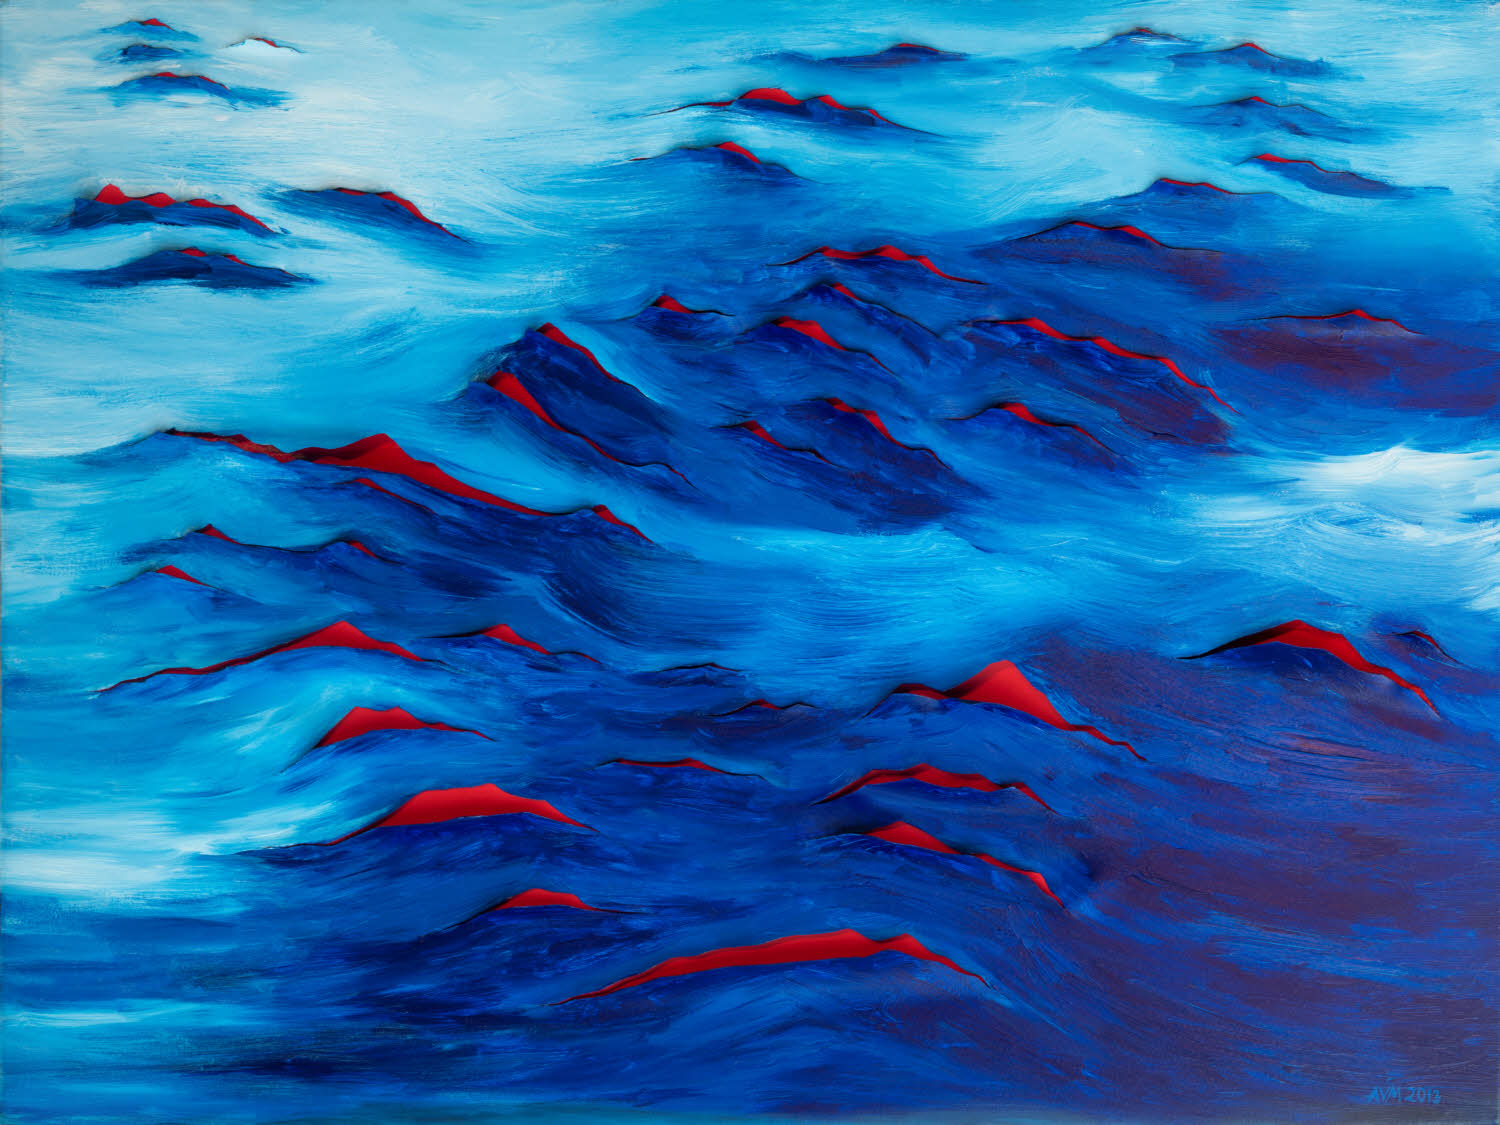 Dark Blue Red, 2013, acrylic on cut canvas with red background, 40x30 inches